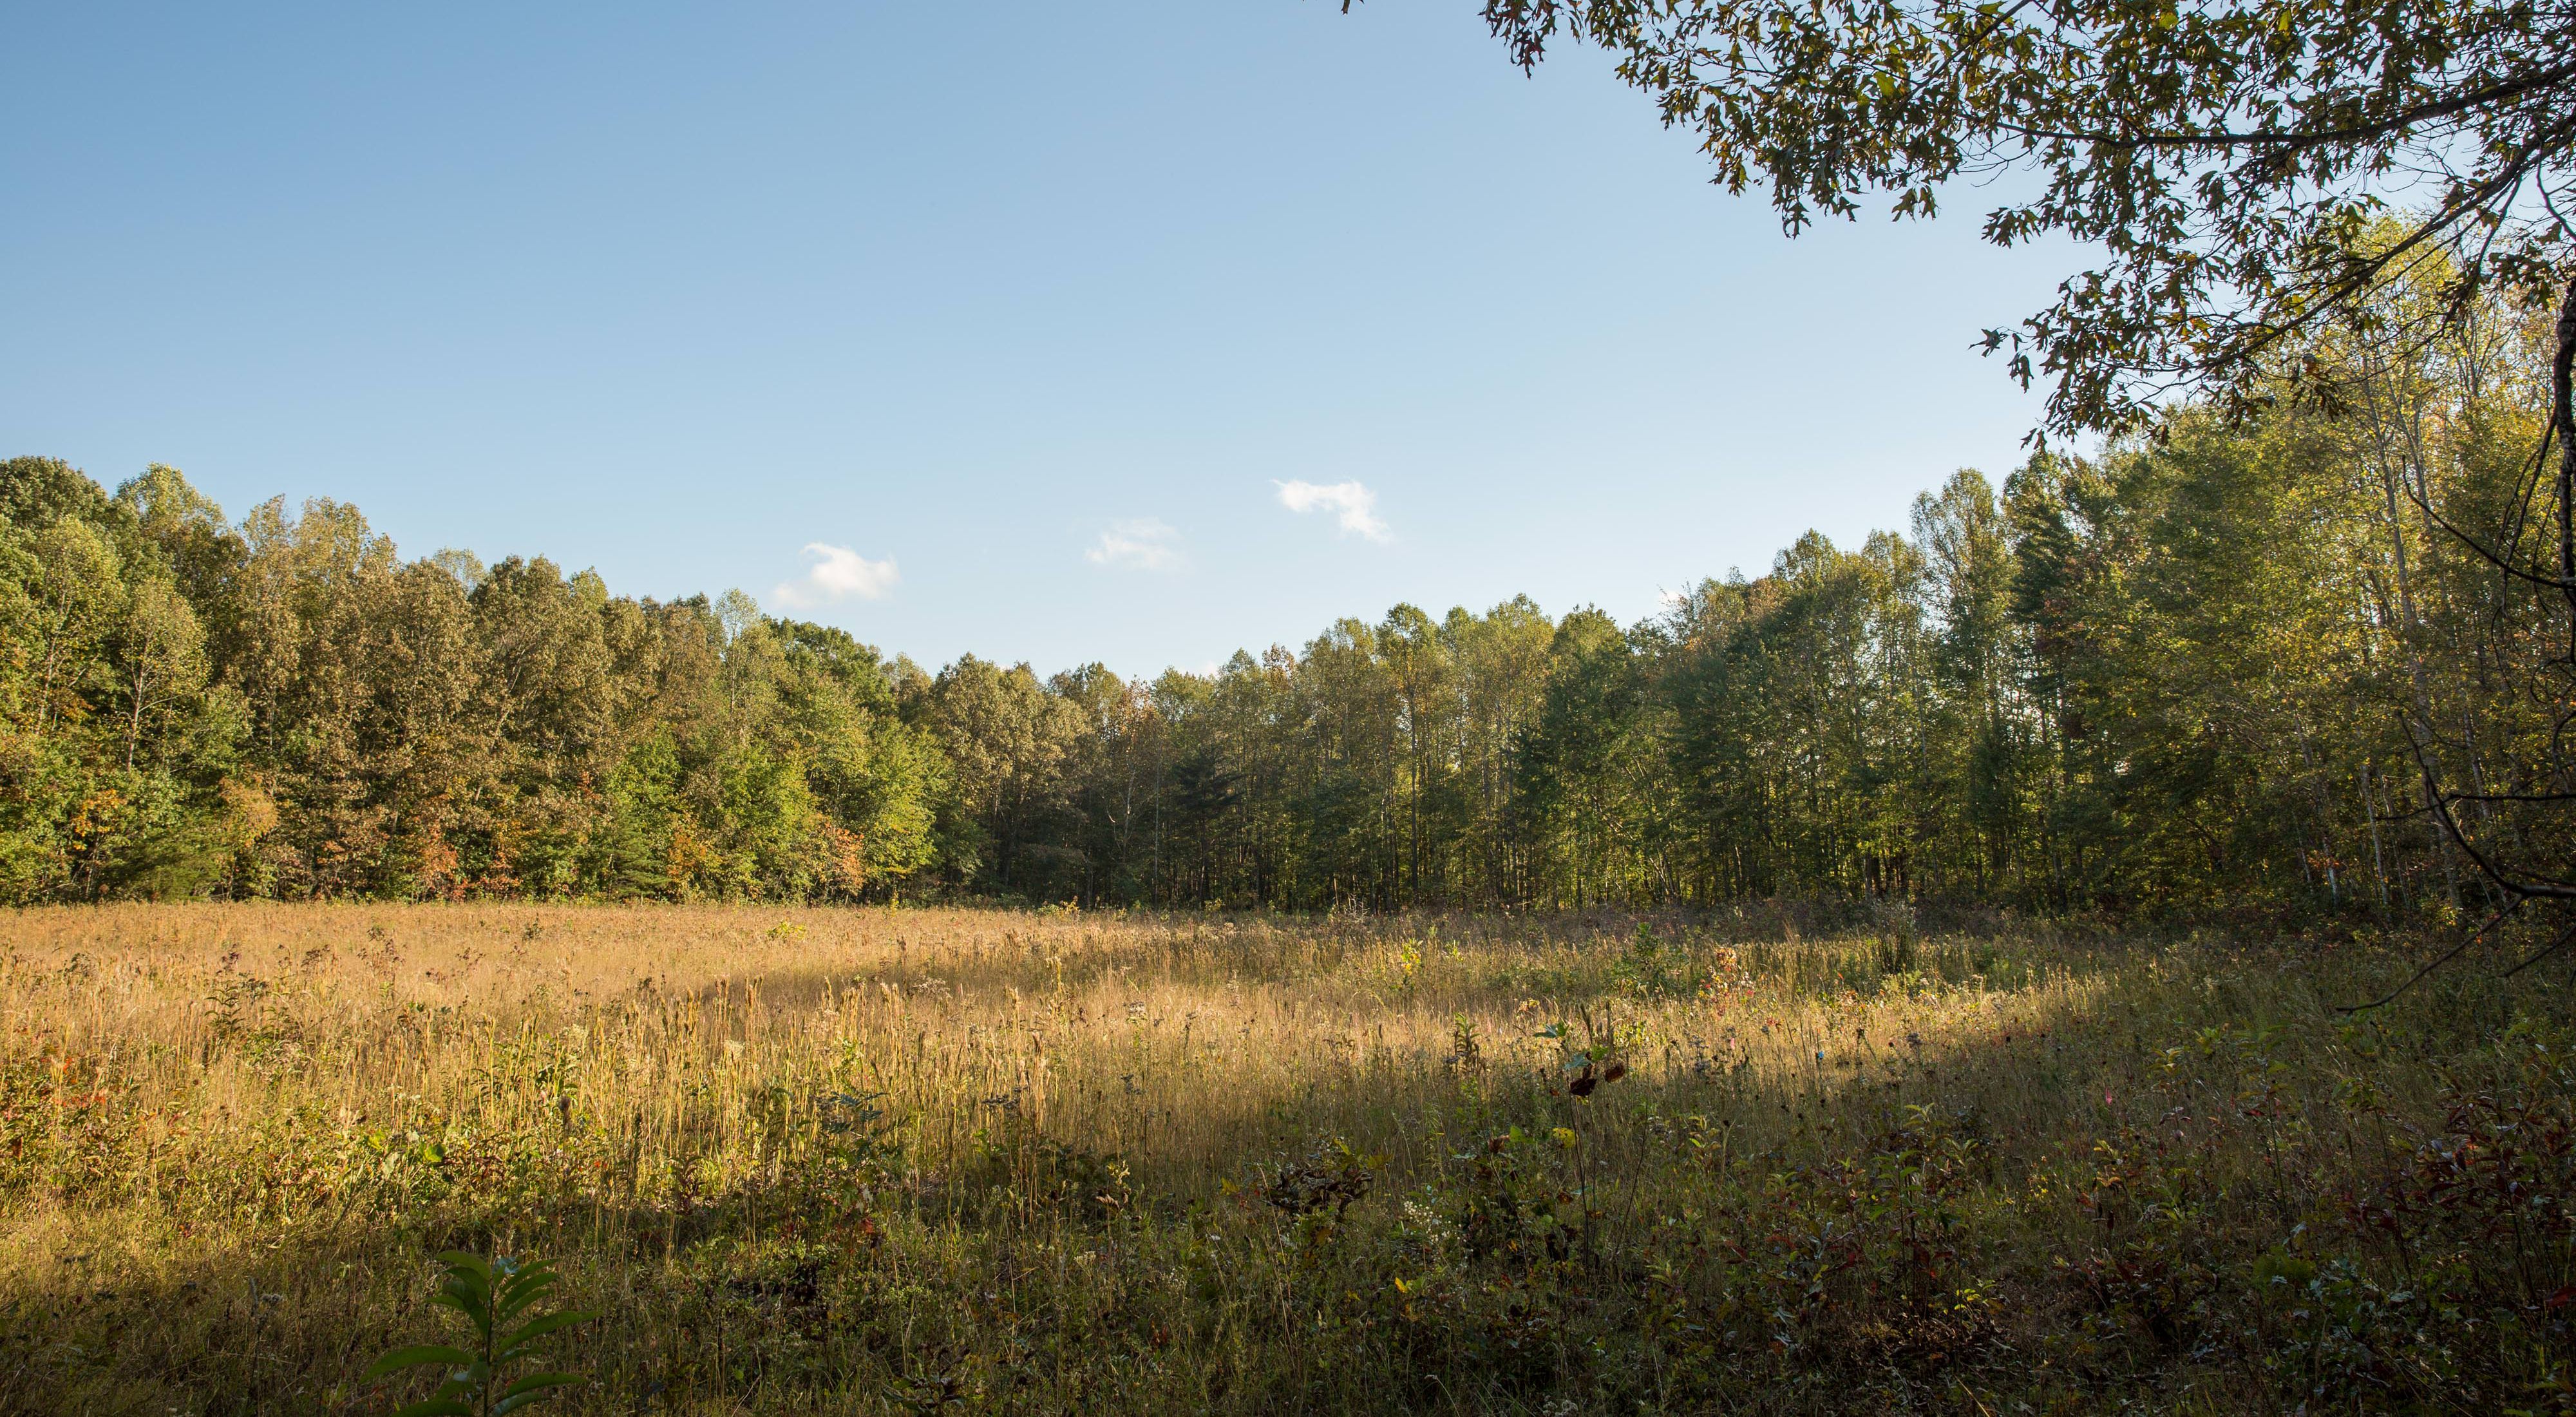 An open prairie surrounded by thick stands of green trees.